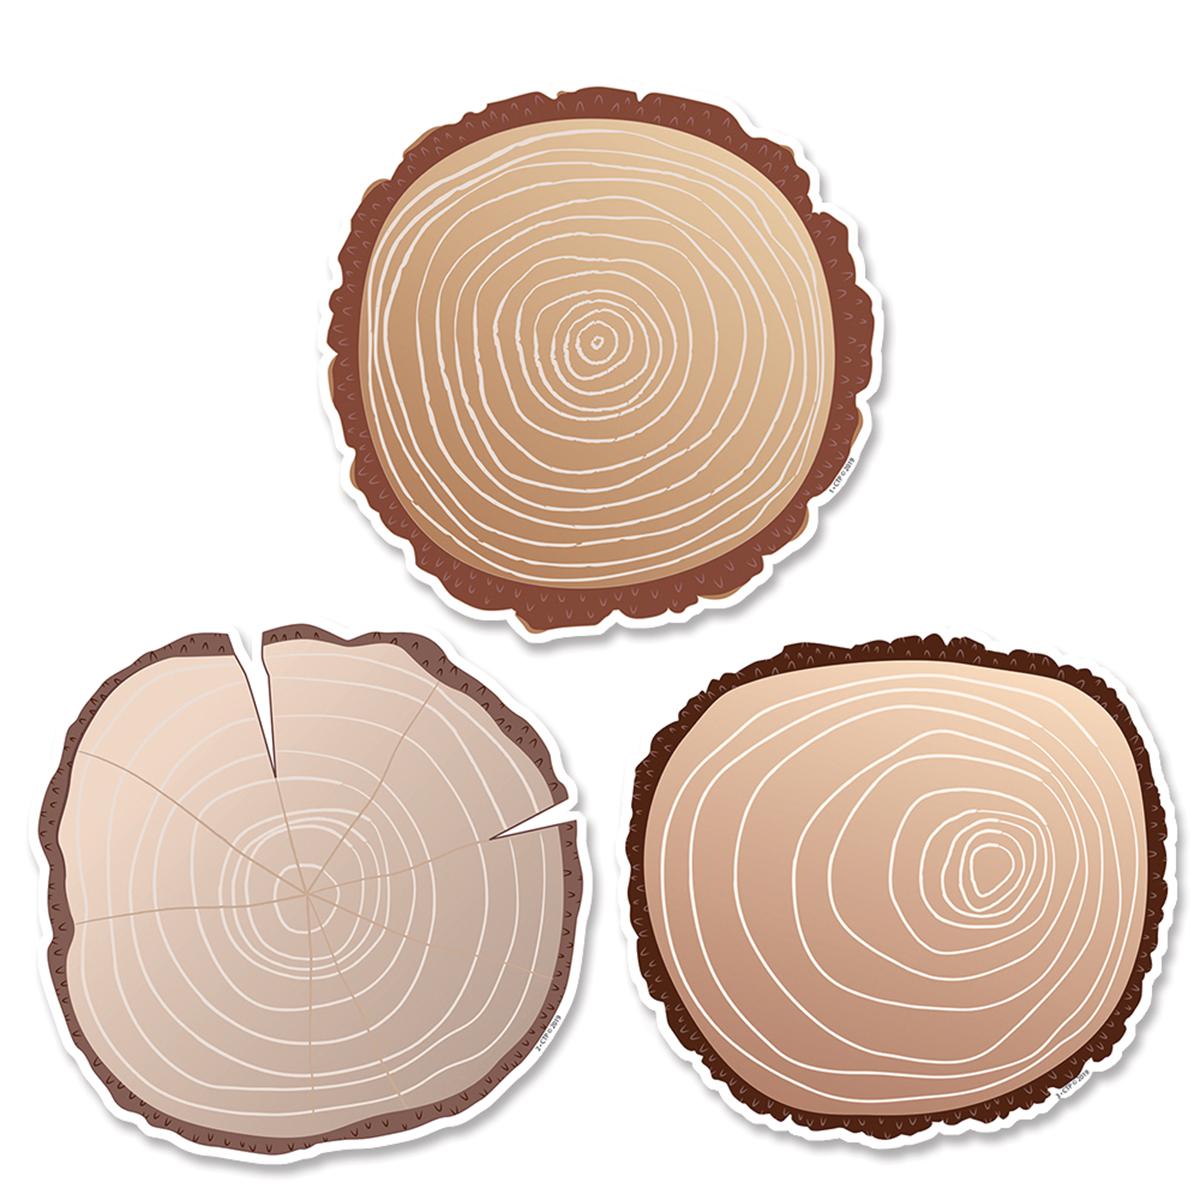  Wood Slices Cut-Outs 